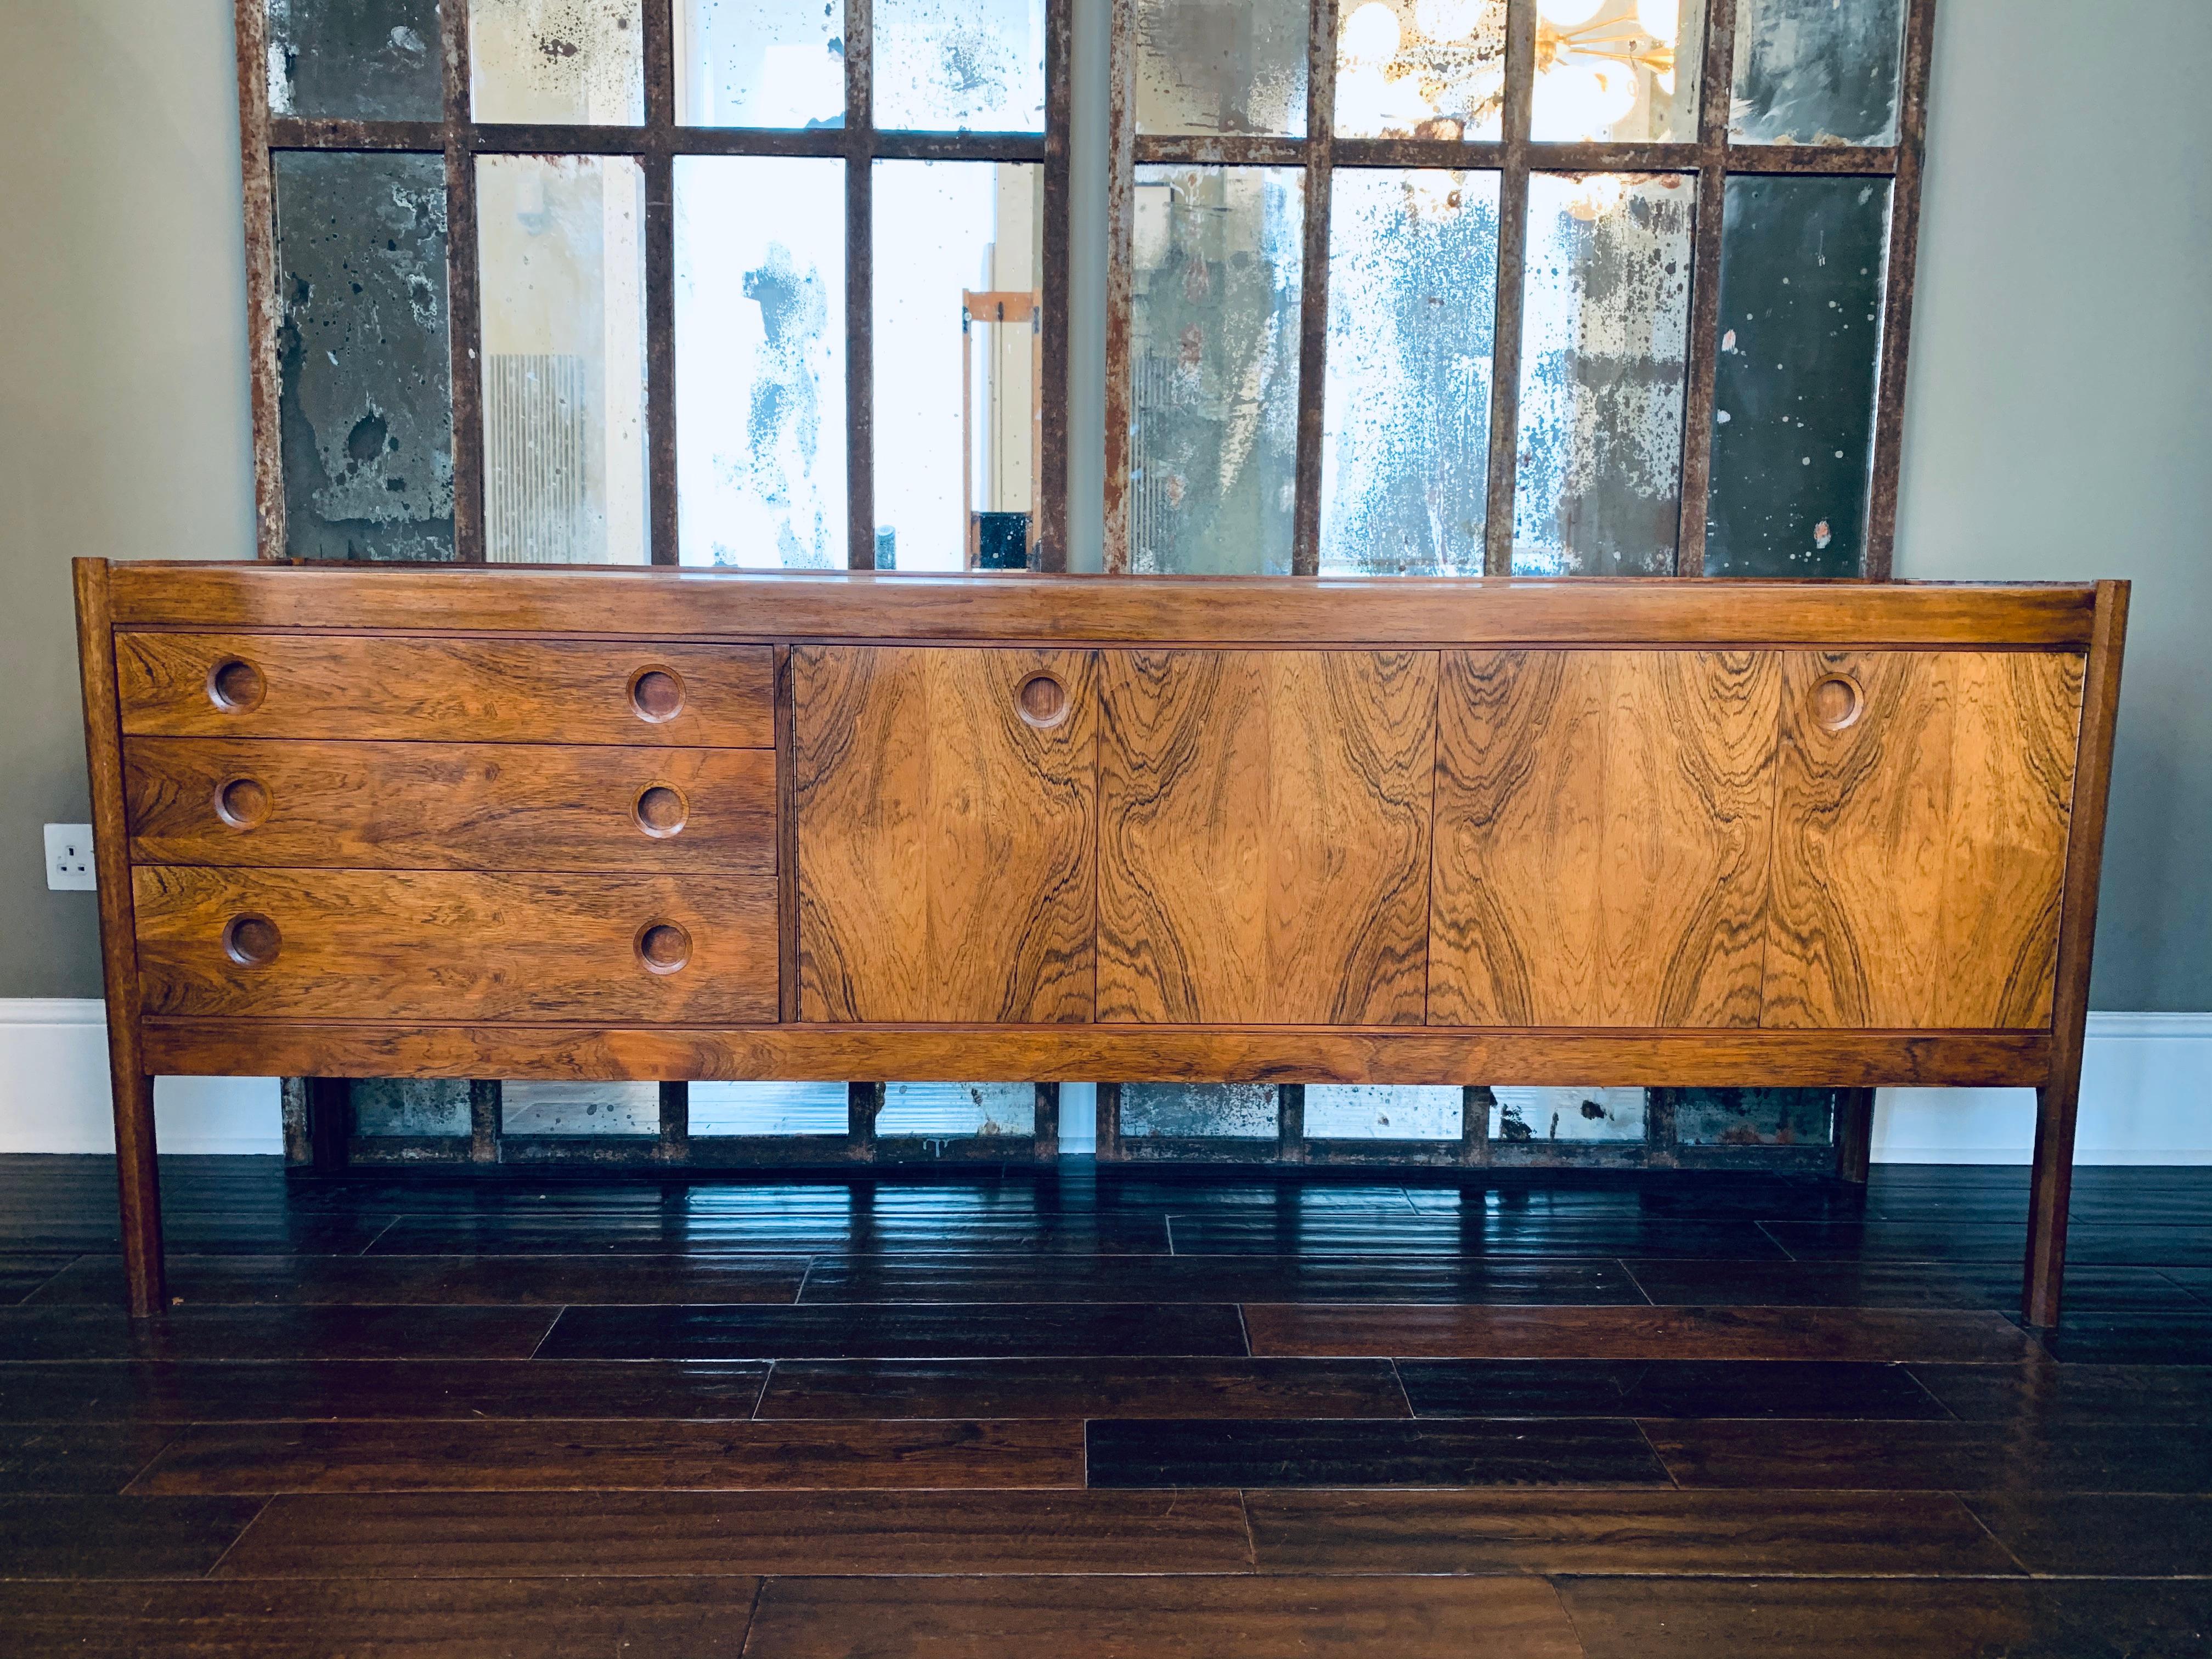 1960s vintage rosewood sideboard, British made in a Danish design, manufactured by Wrighton, who were known as one of the first quality makers of fitted kitchens in the U.K. but also produced a small amount of furniture therefore making this piece